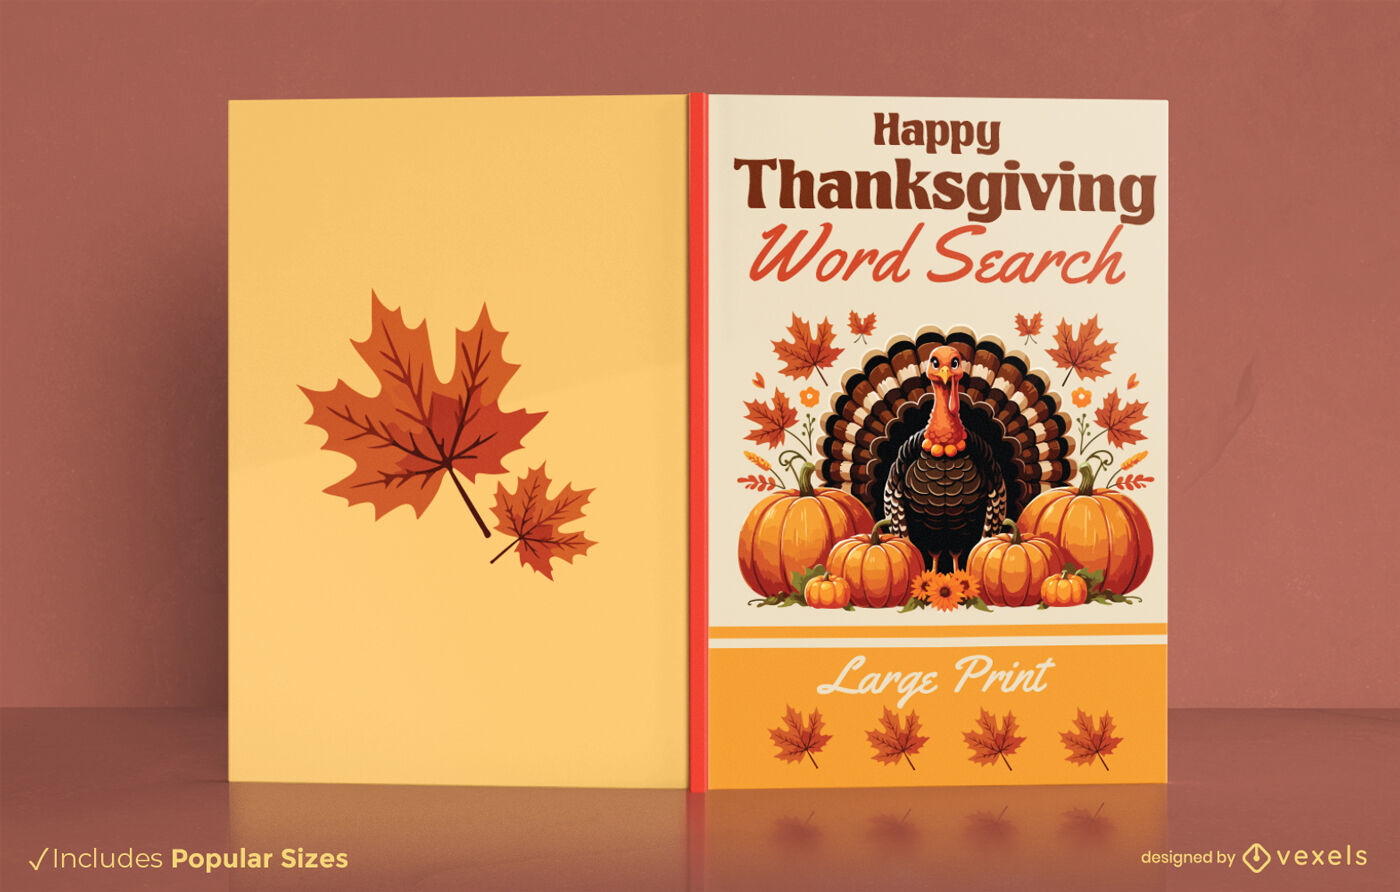 Thanksgiving word search book cover design